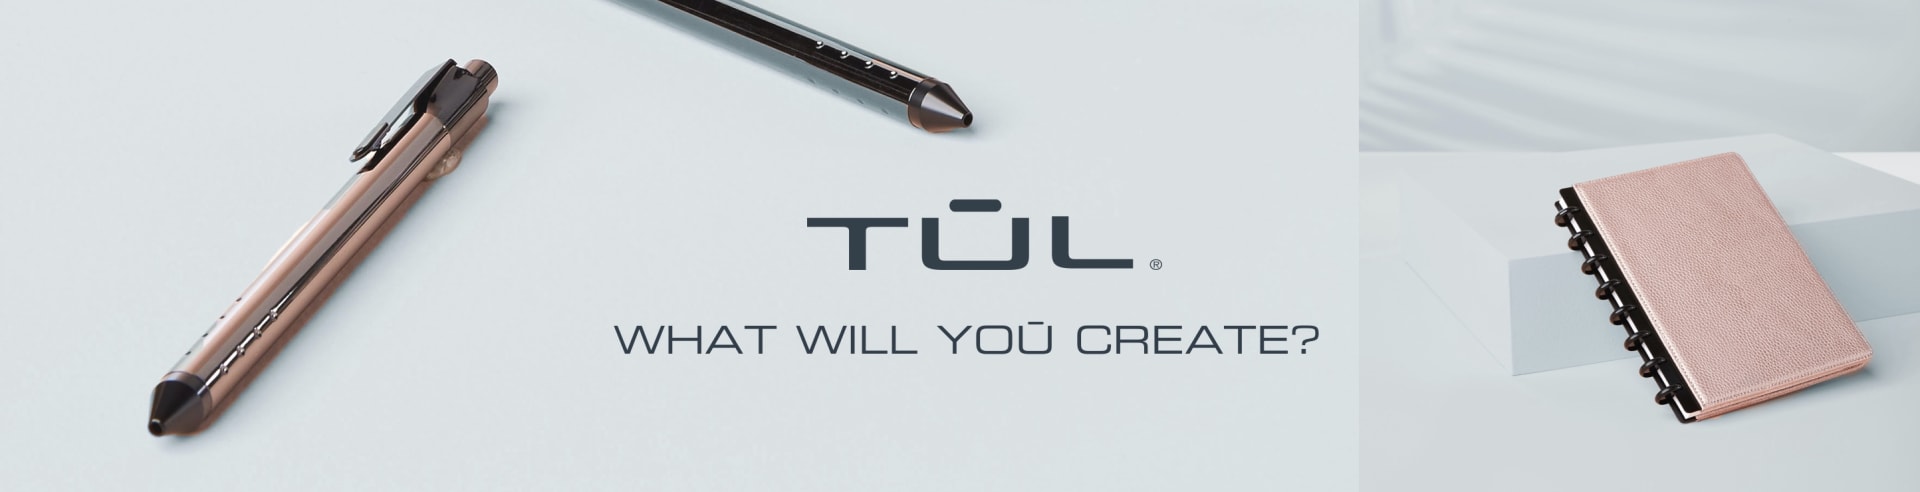 TUL what will you create?